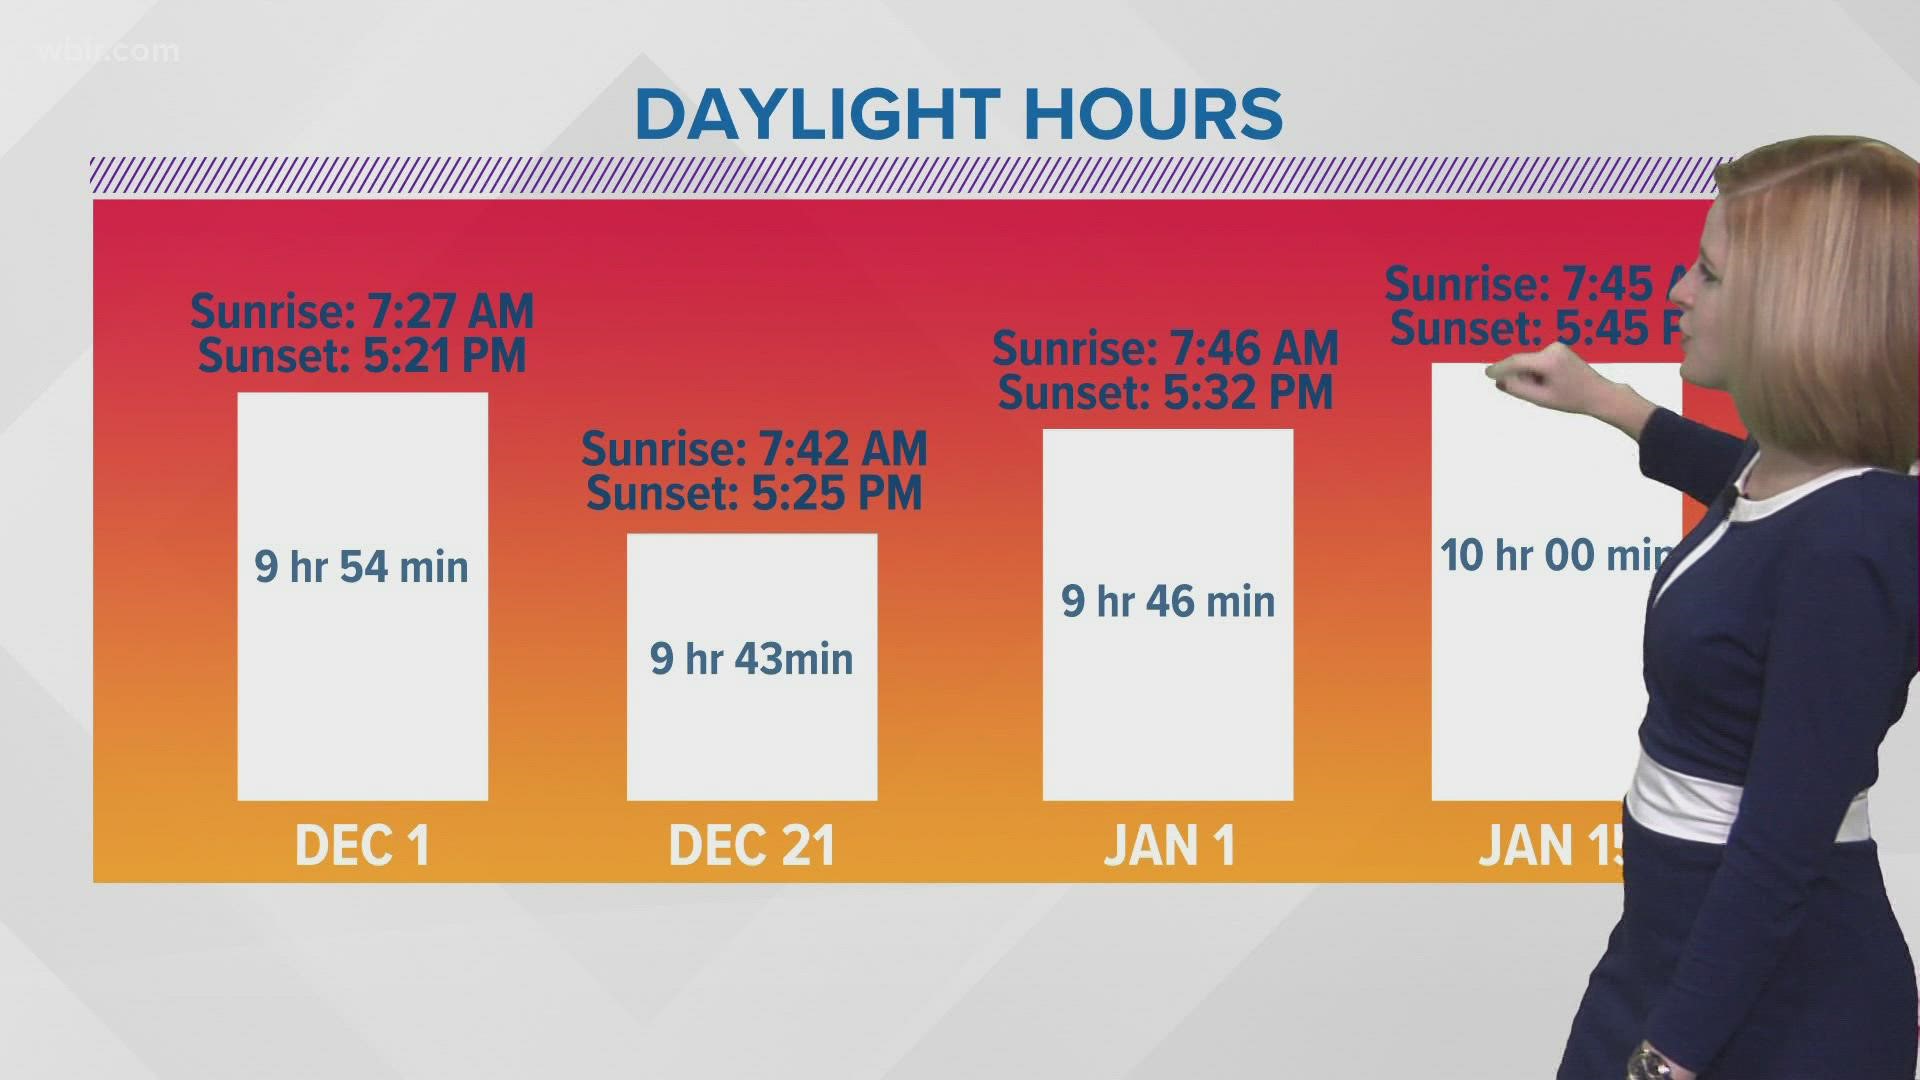 Daylight hours continue to decrease, but not for too much longer! Dec. 1 will have the earliest sunset, but sunrise will happen later.